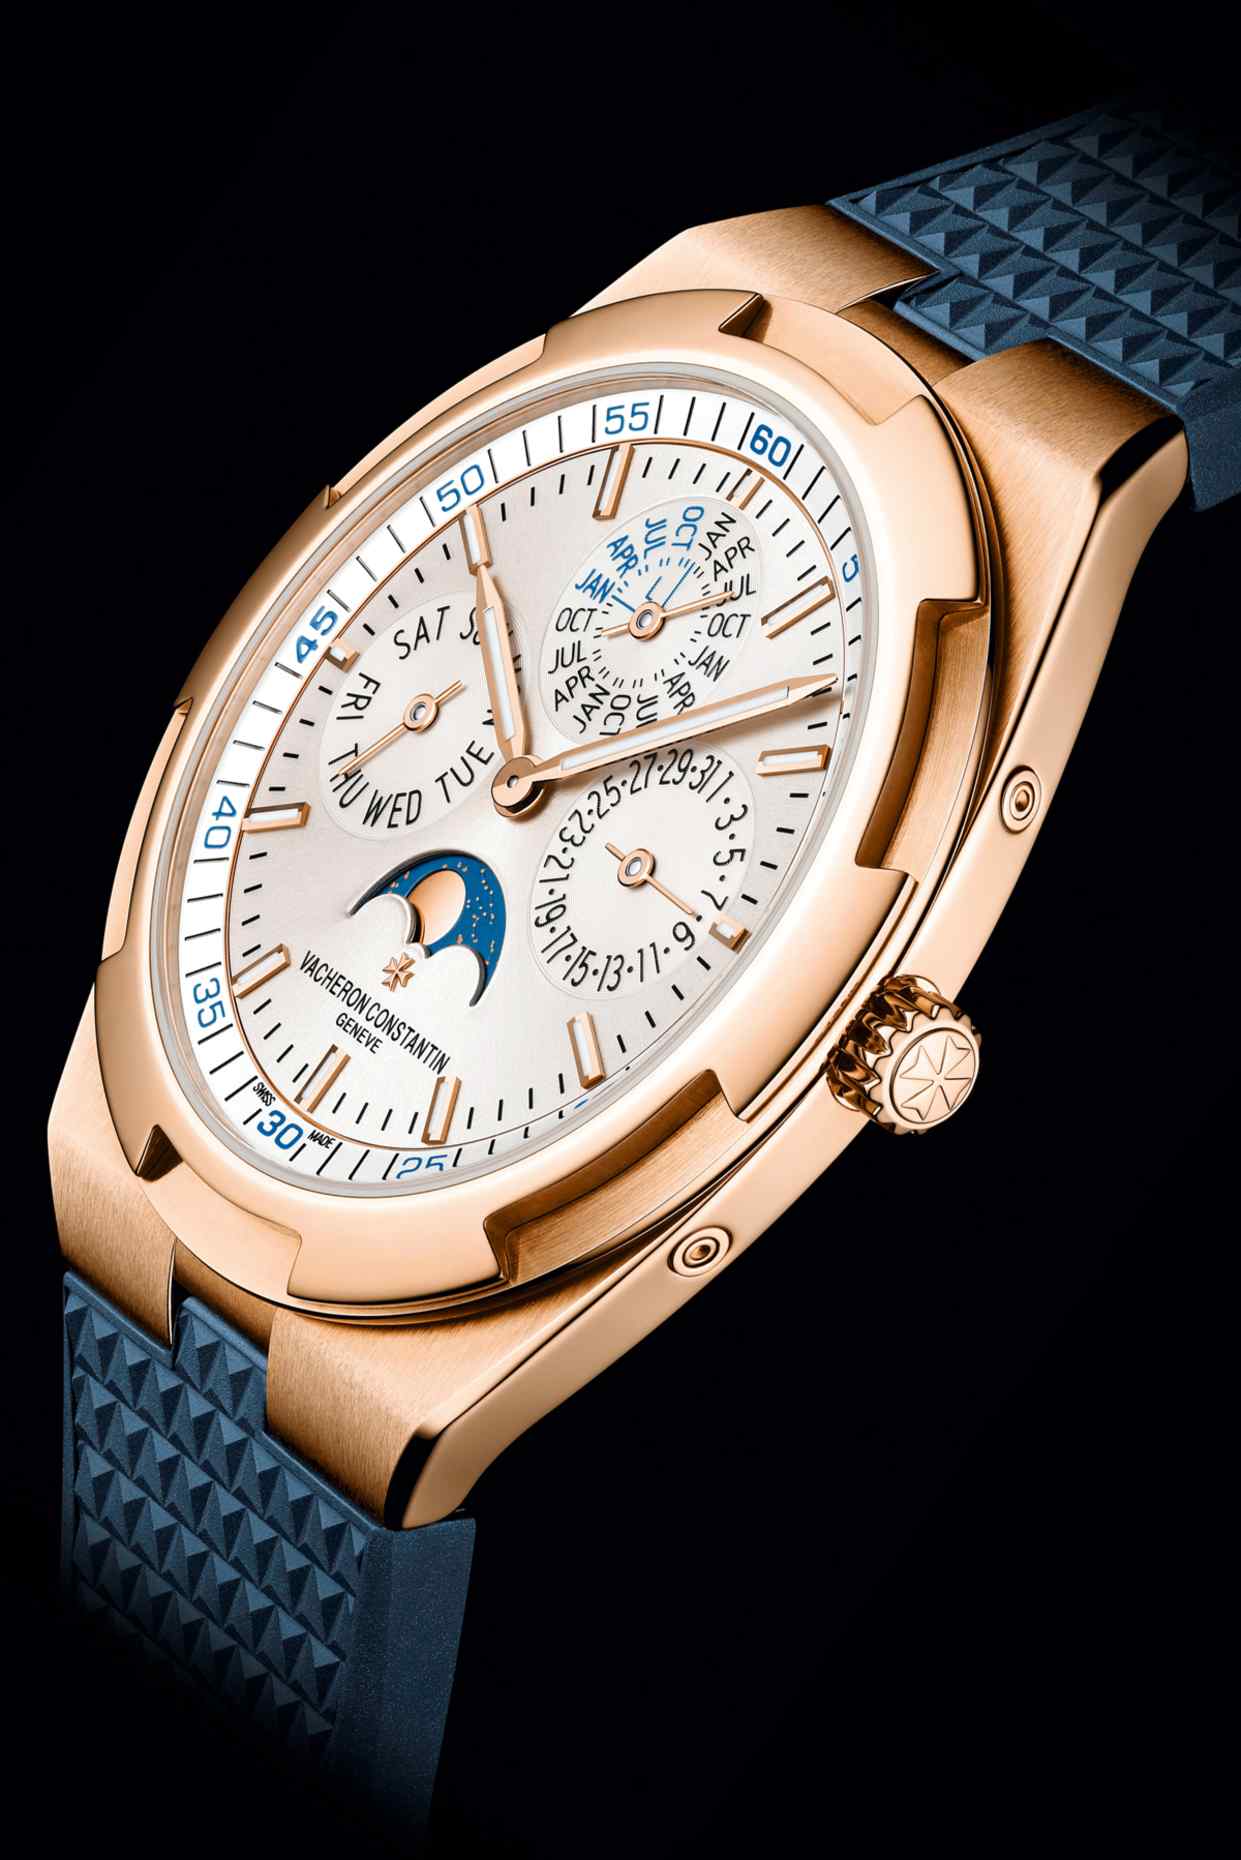 Vacheron Constantin’s devilishly complicated sports watch | How To Spend It